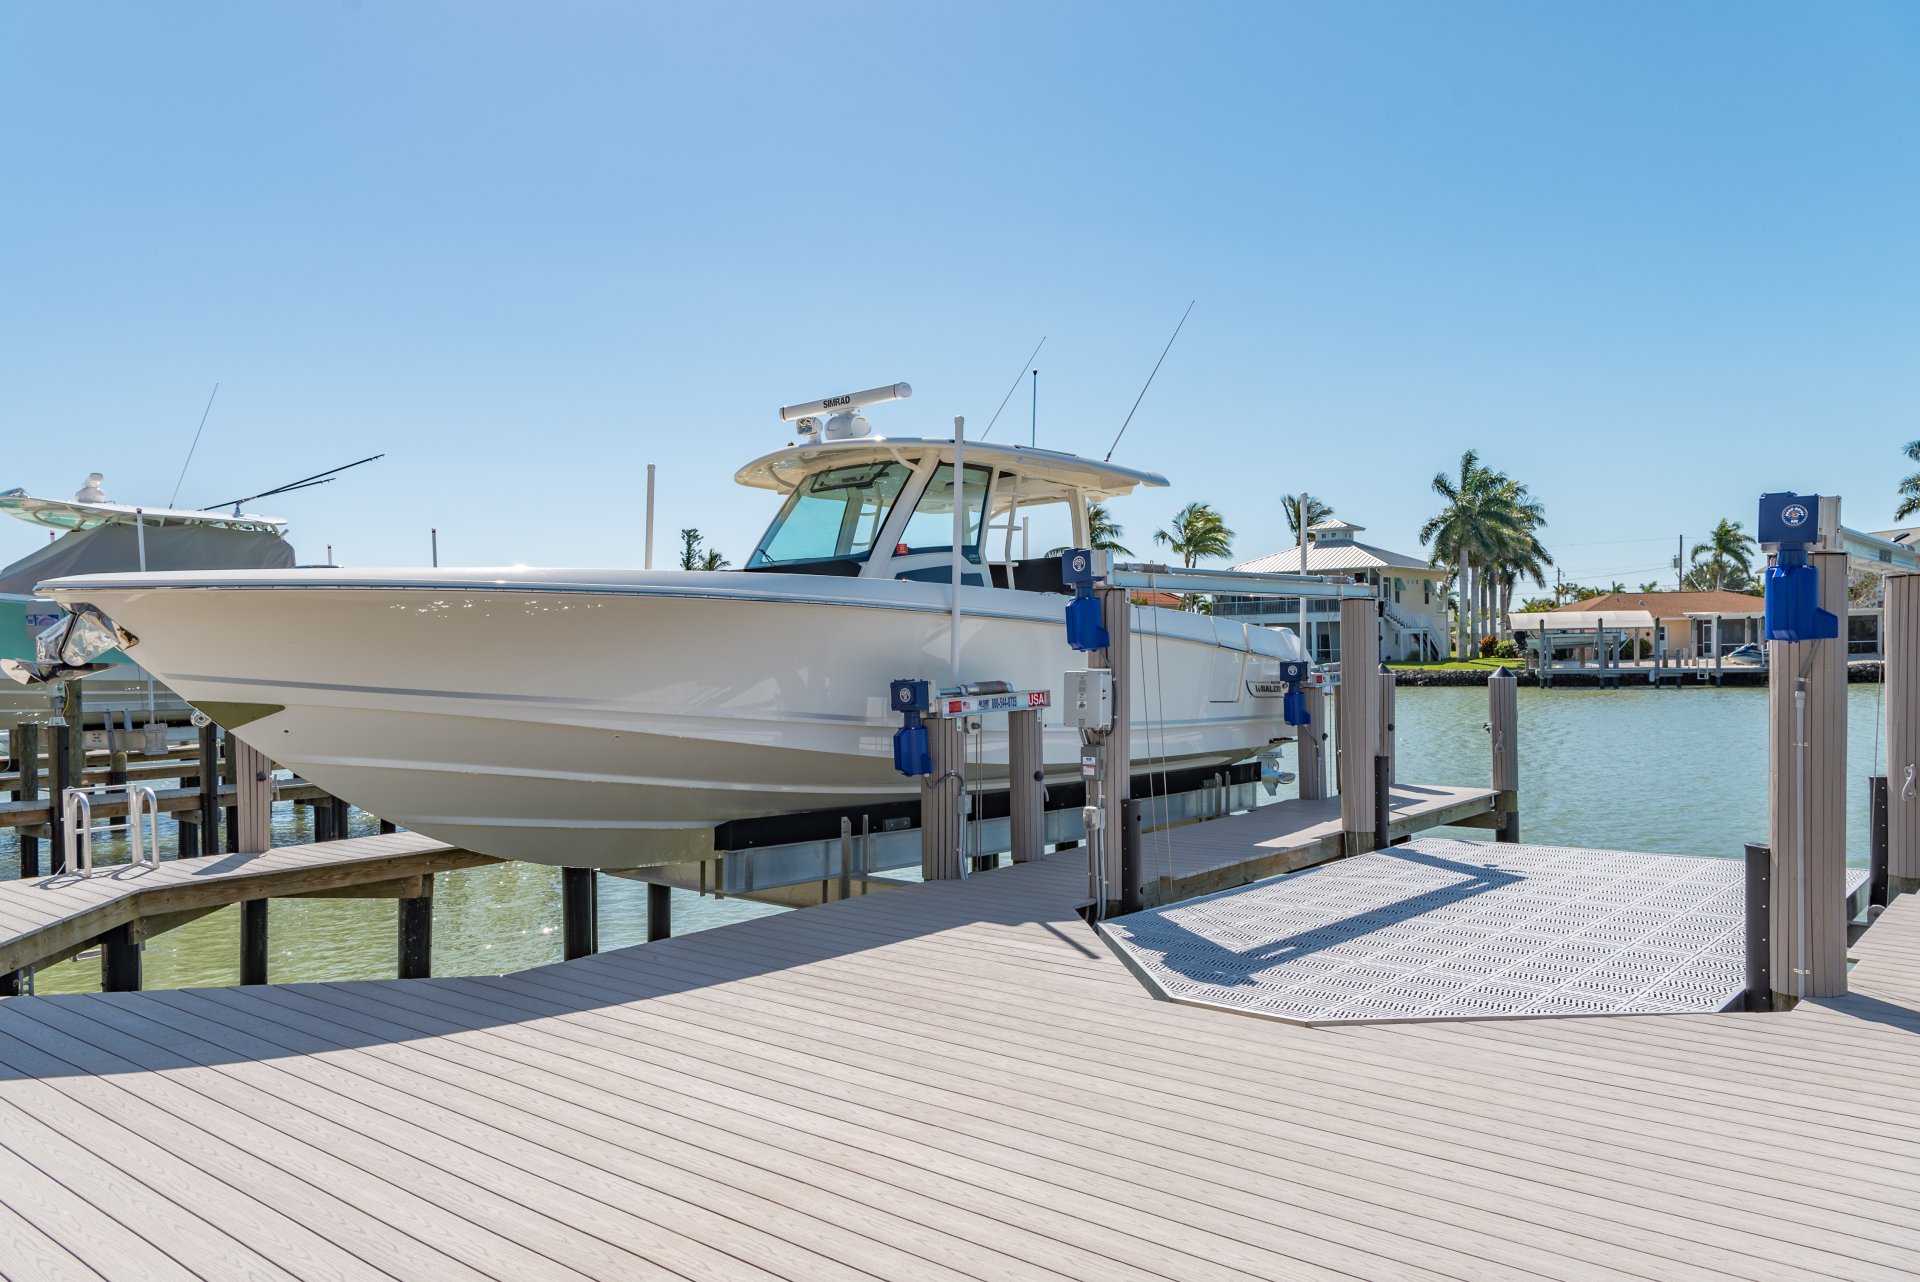 park shore - boat slips for sale or rent in 34103